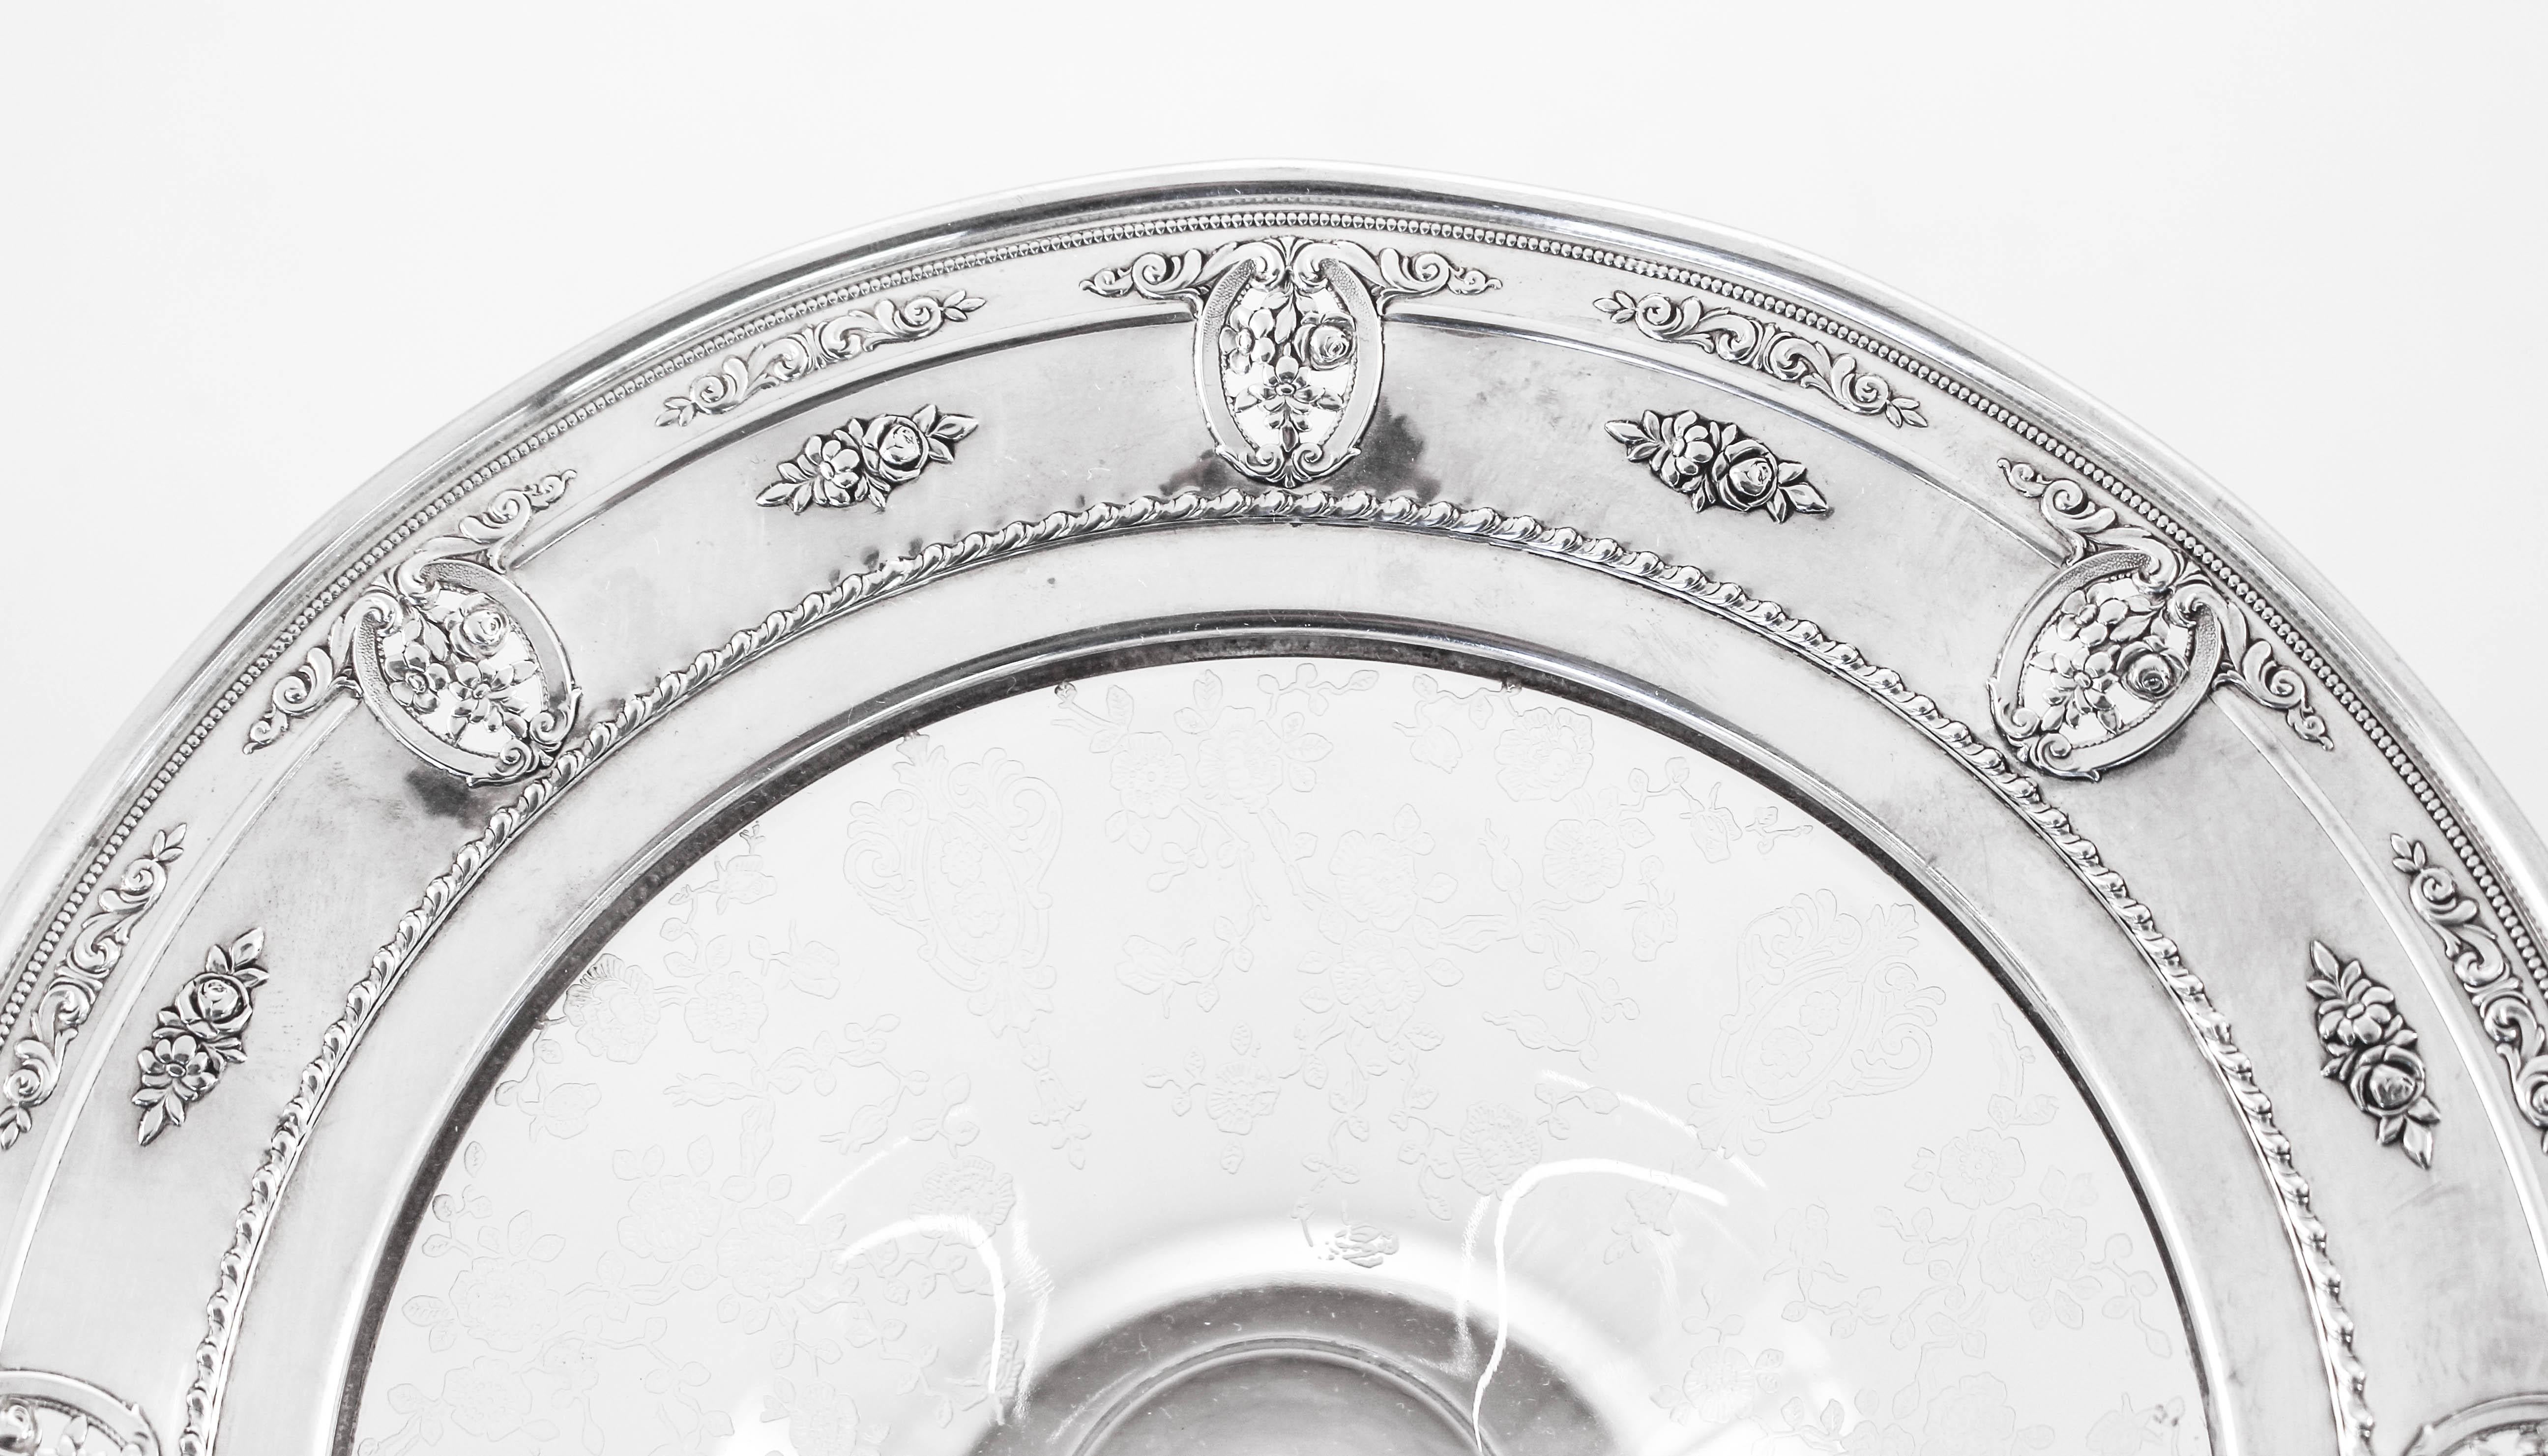 Proud to offer this sterling and crystal compote by Wallace Silversmiths in the Rose-Point pattern. A two-inch sterling border encircles the top while a smaller one encircles the base. There are eight floral motifs with cutout and a fluted edge. The